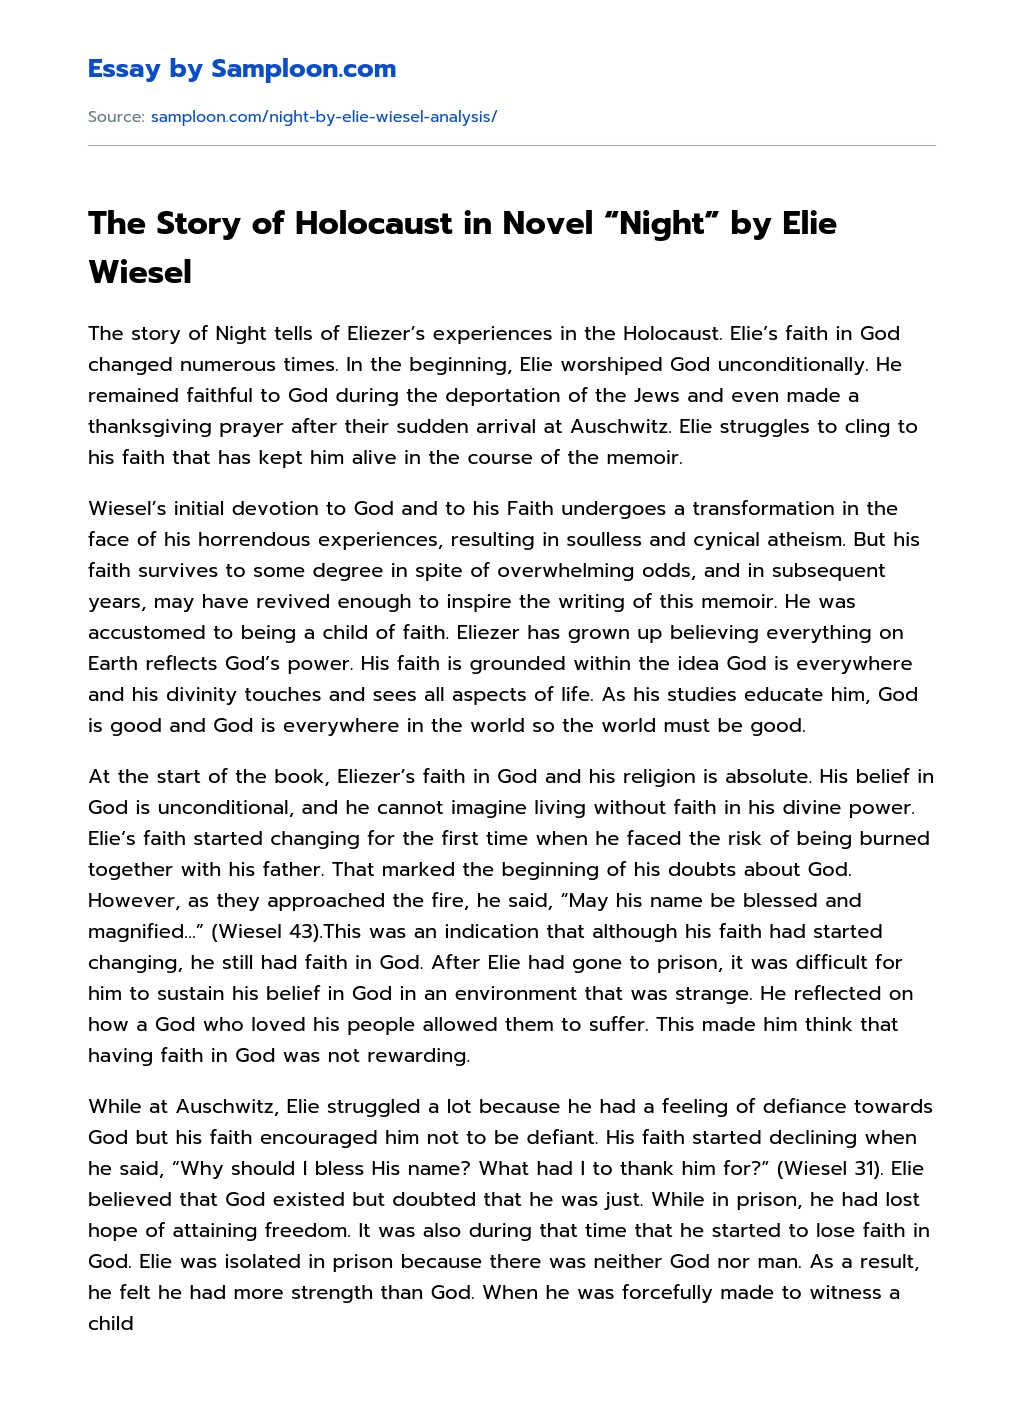 The Story of Holocaust in Novel “Night” by Elie Wiesel Book Review essay